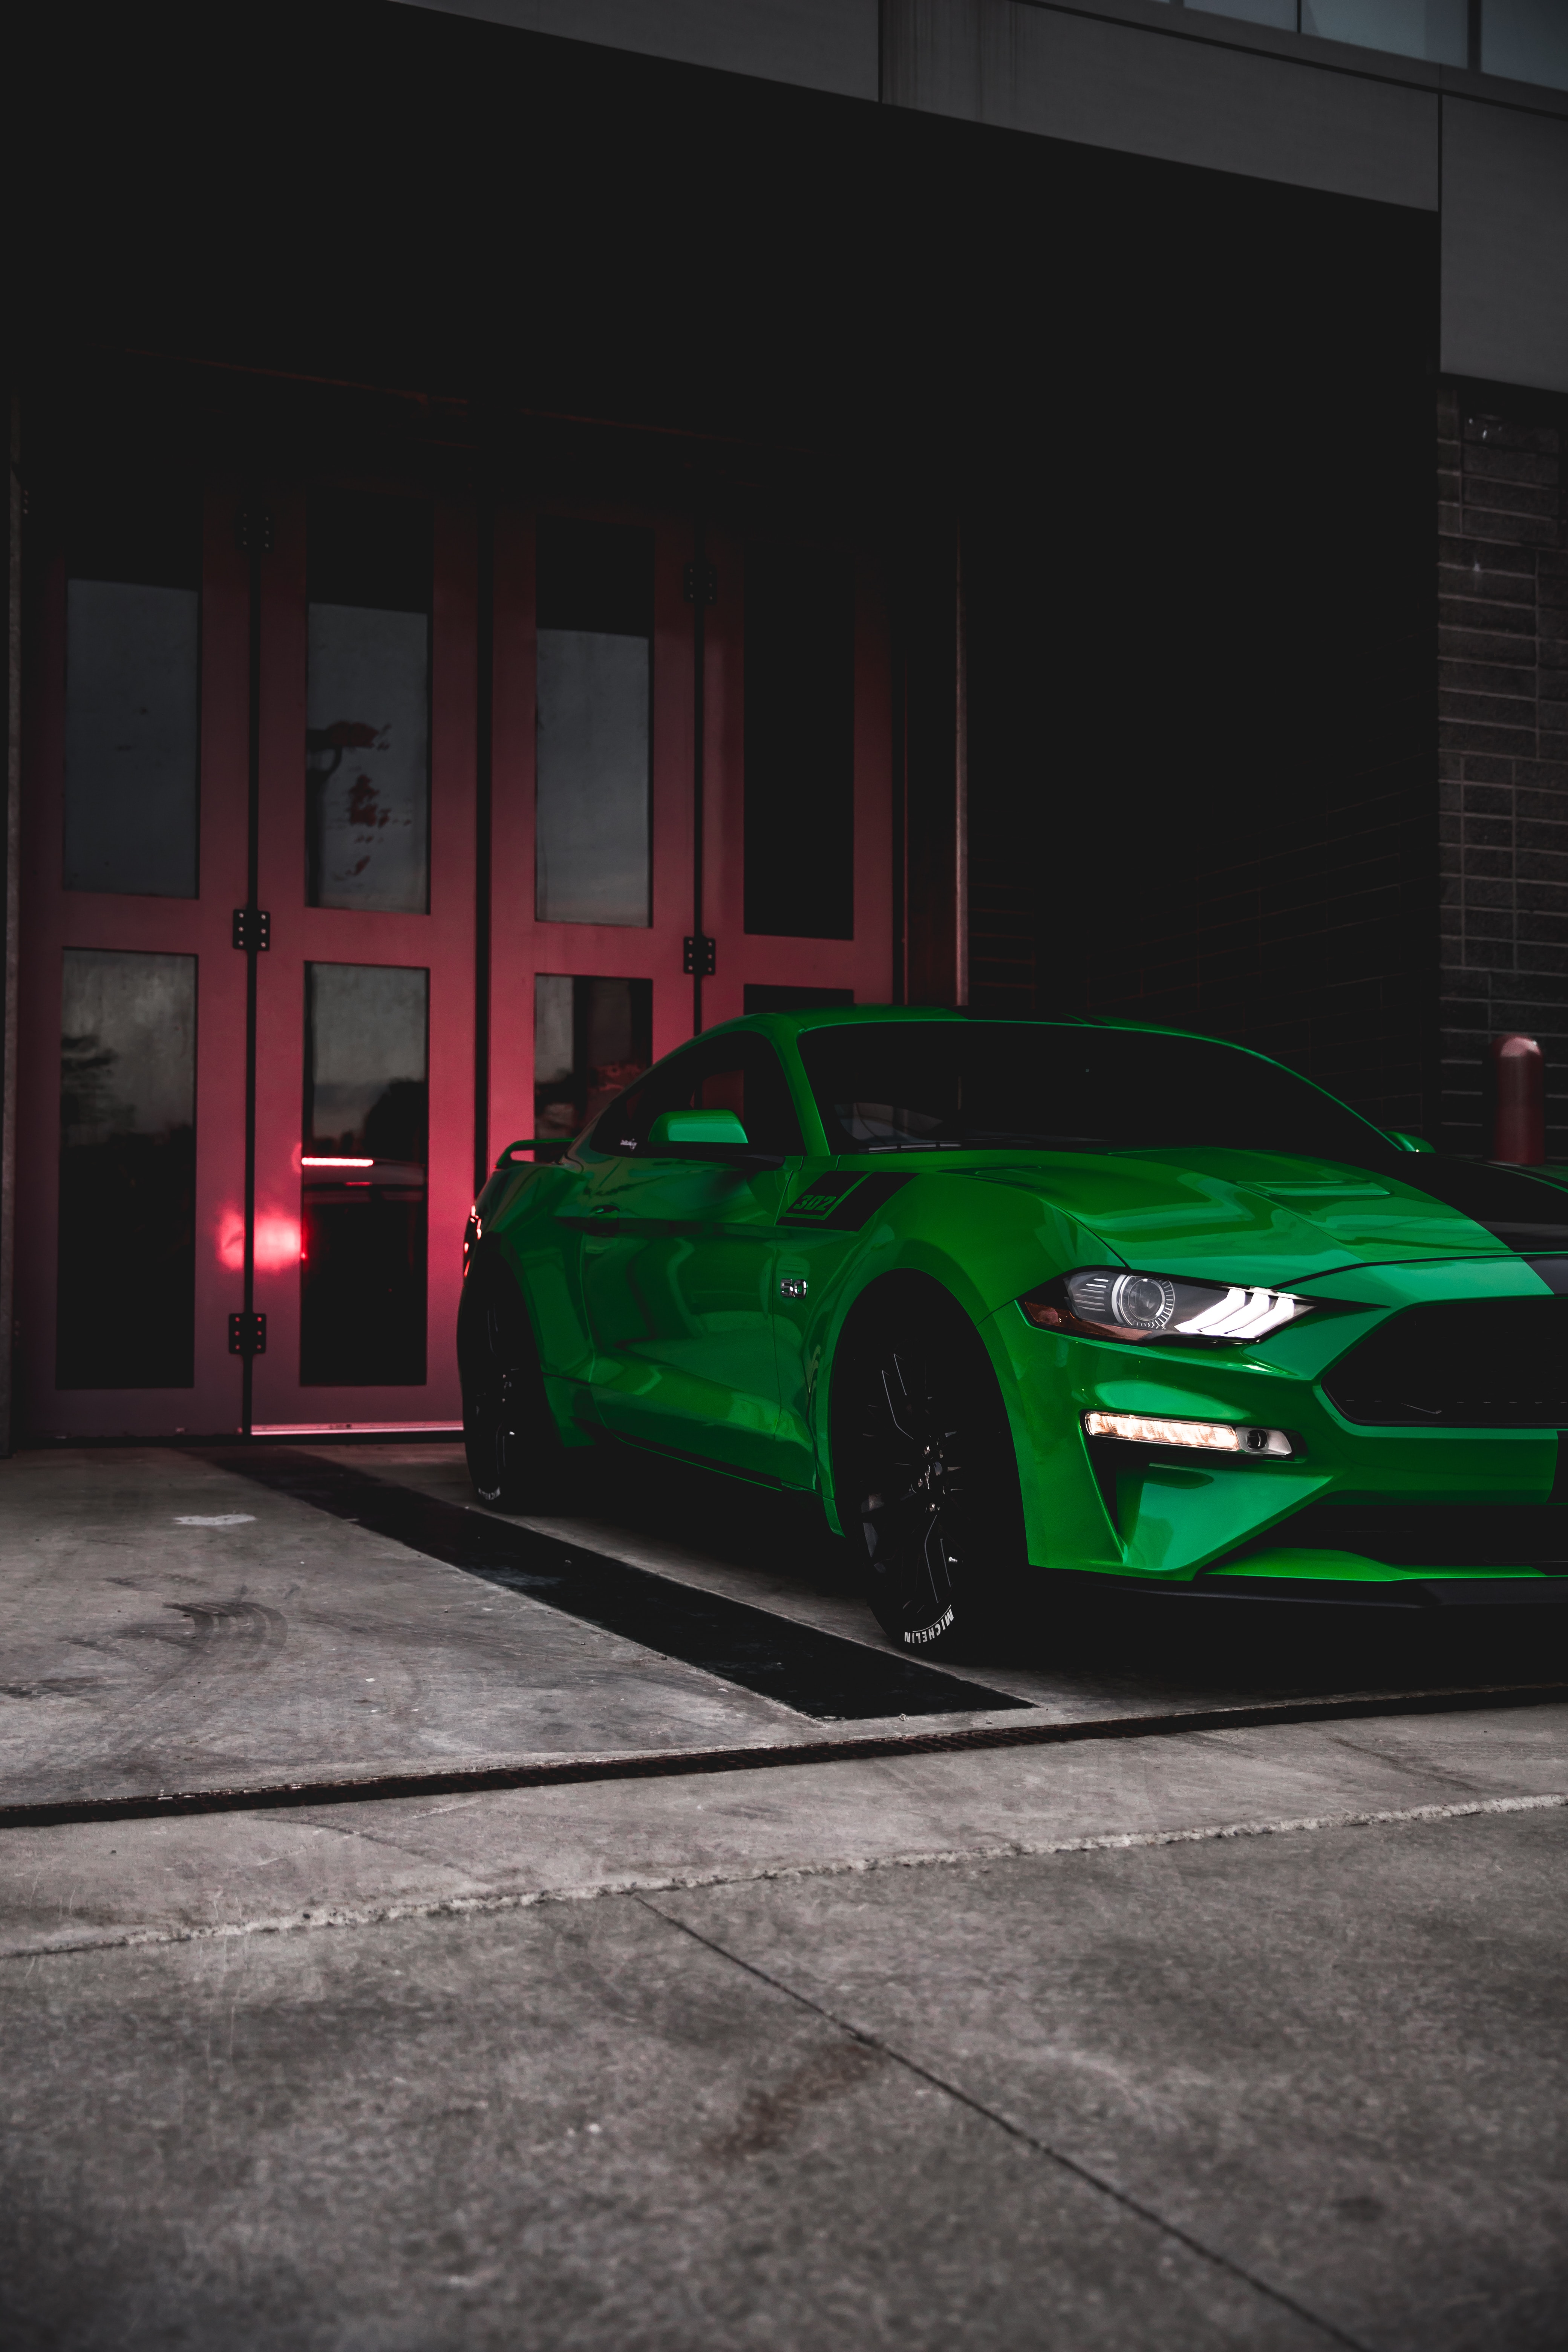 ford, cars, sports, car, ford mustang, green, machine, sports car, parking